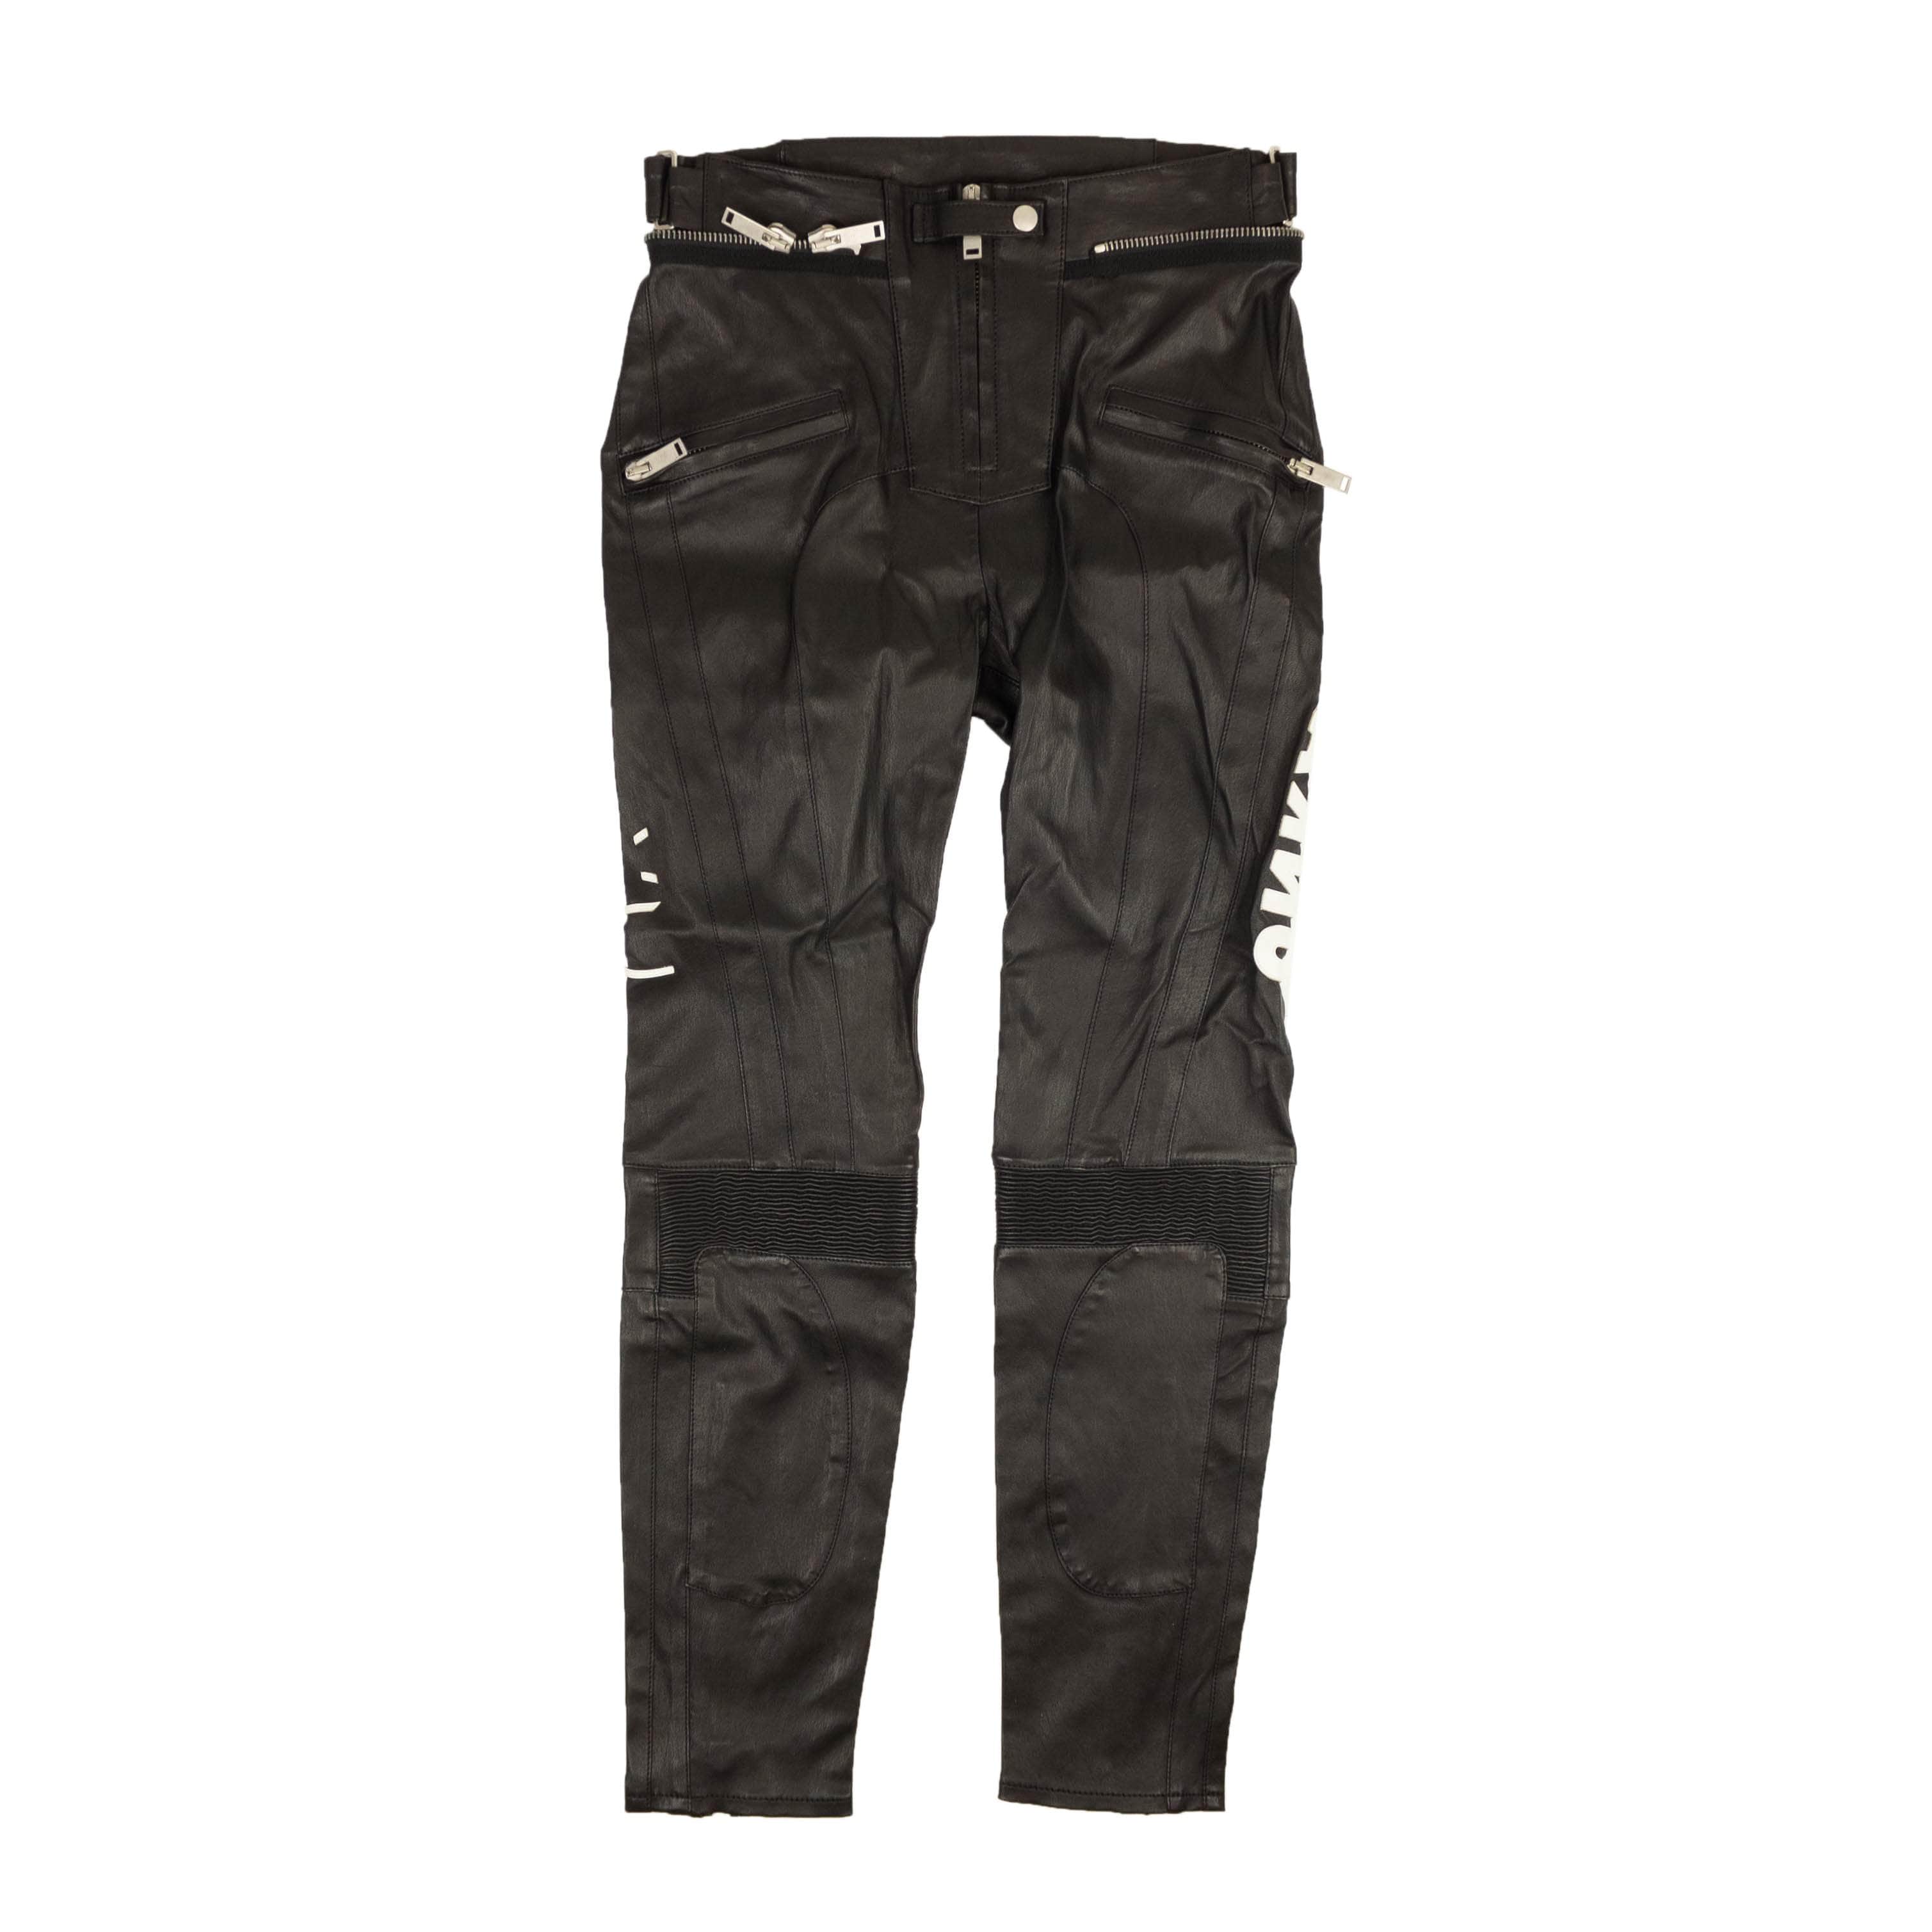 Unravel Project 500-750, channelenable-all, chicmi, couponcollection, gender-womens, main-clothing, size-30, unravel-project 30 Black Leather Logo Skinny Pants 74NGG-UN-1129/30 74NGG-UN-1129/30